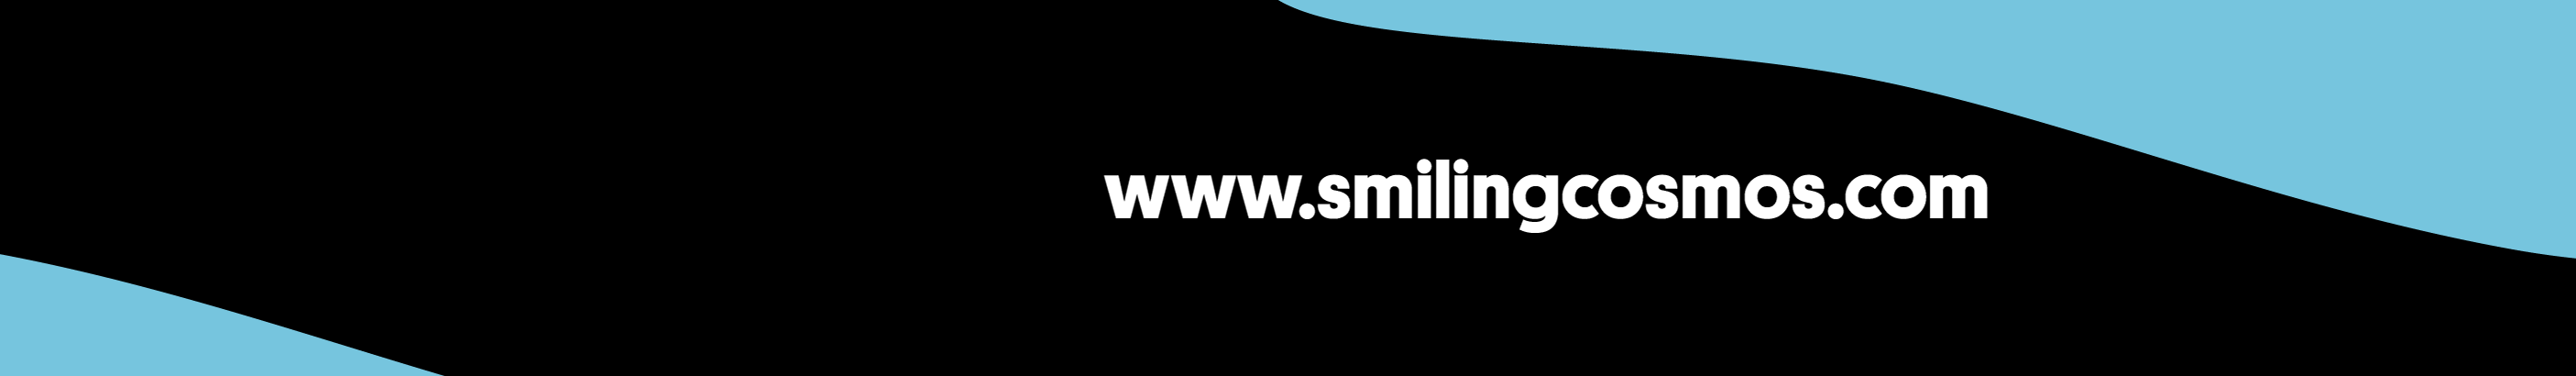 Smiling Cosmos's profile banner